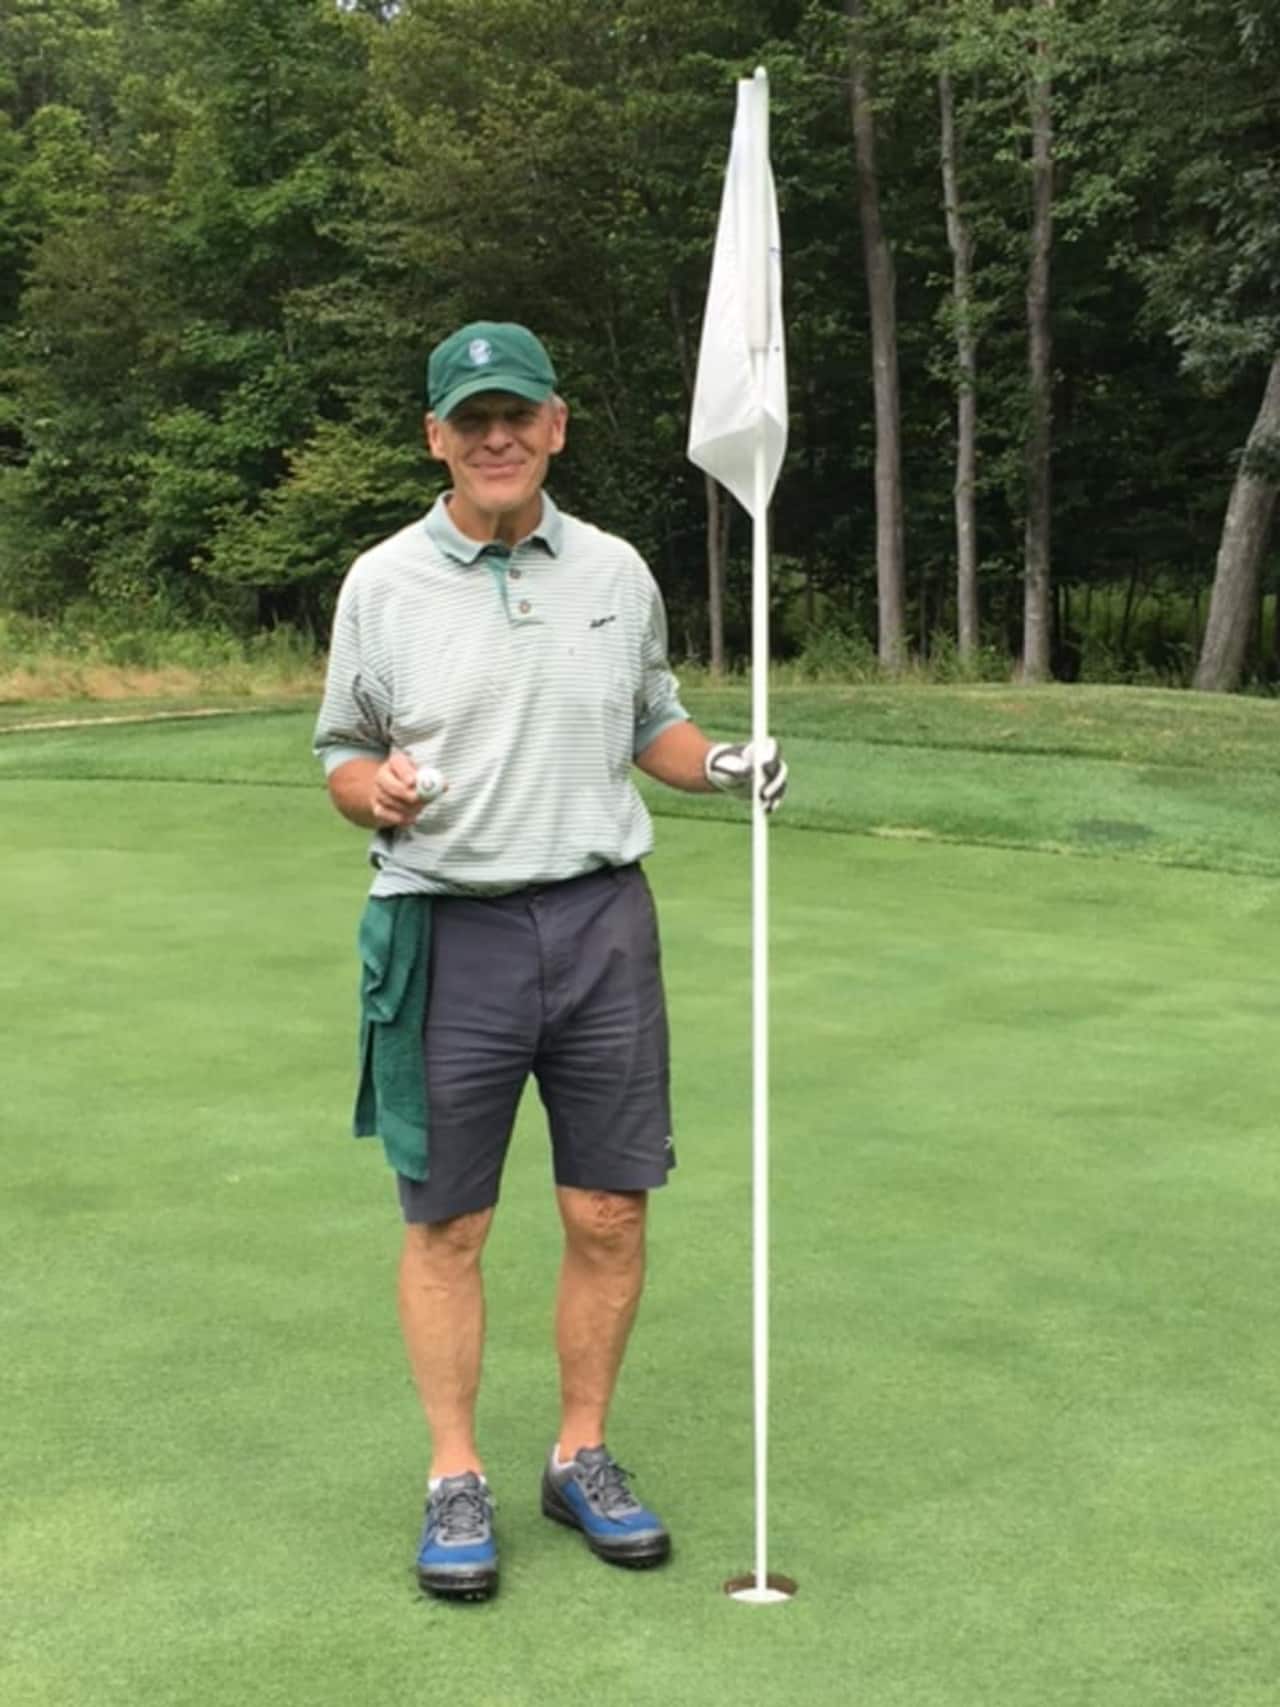 One year after shoulder replacement surgery, Greenwich resident James Dean scored a hole-in-one.